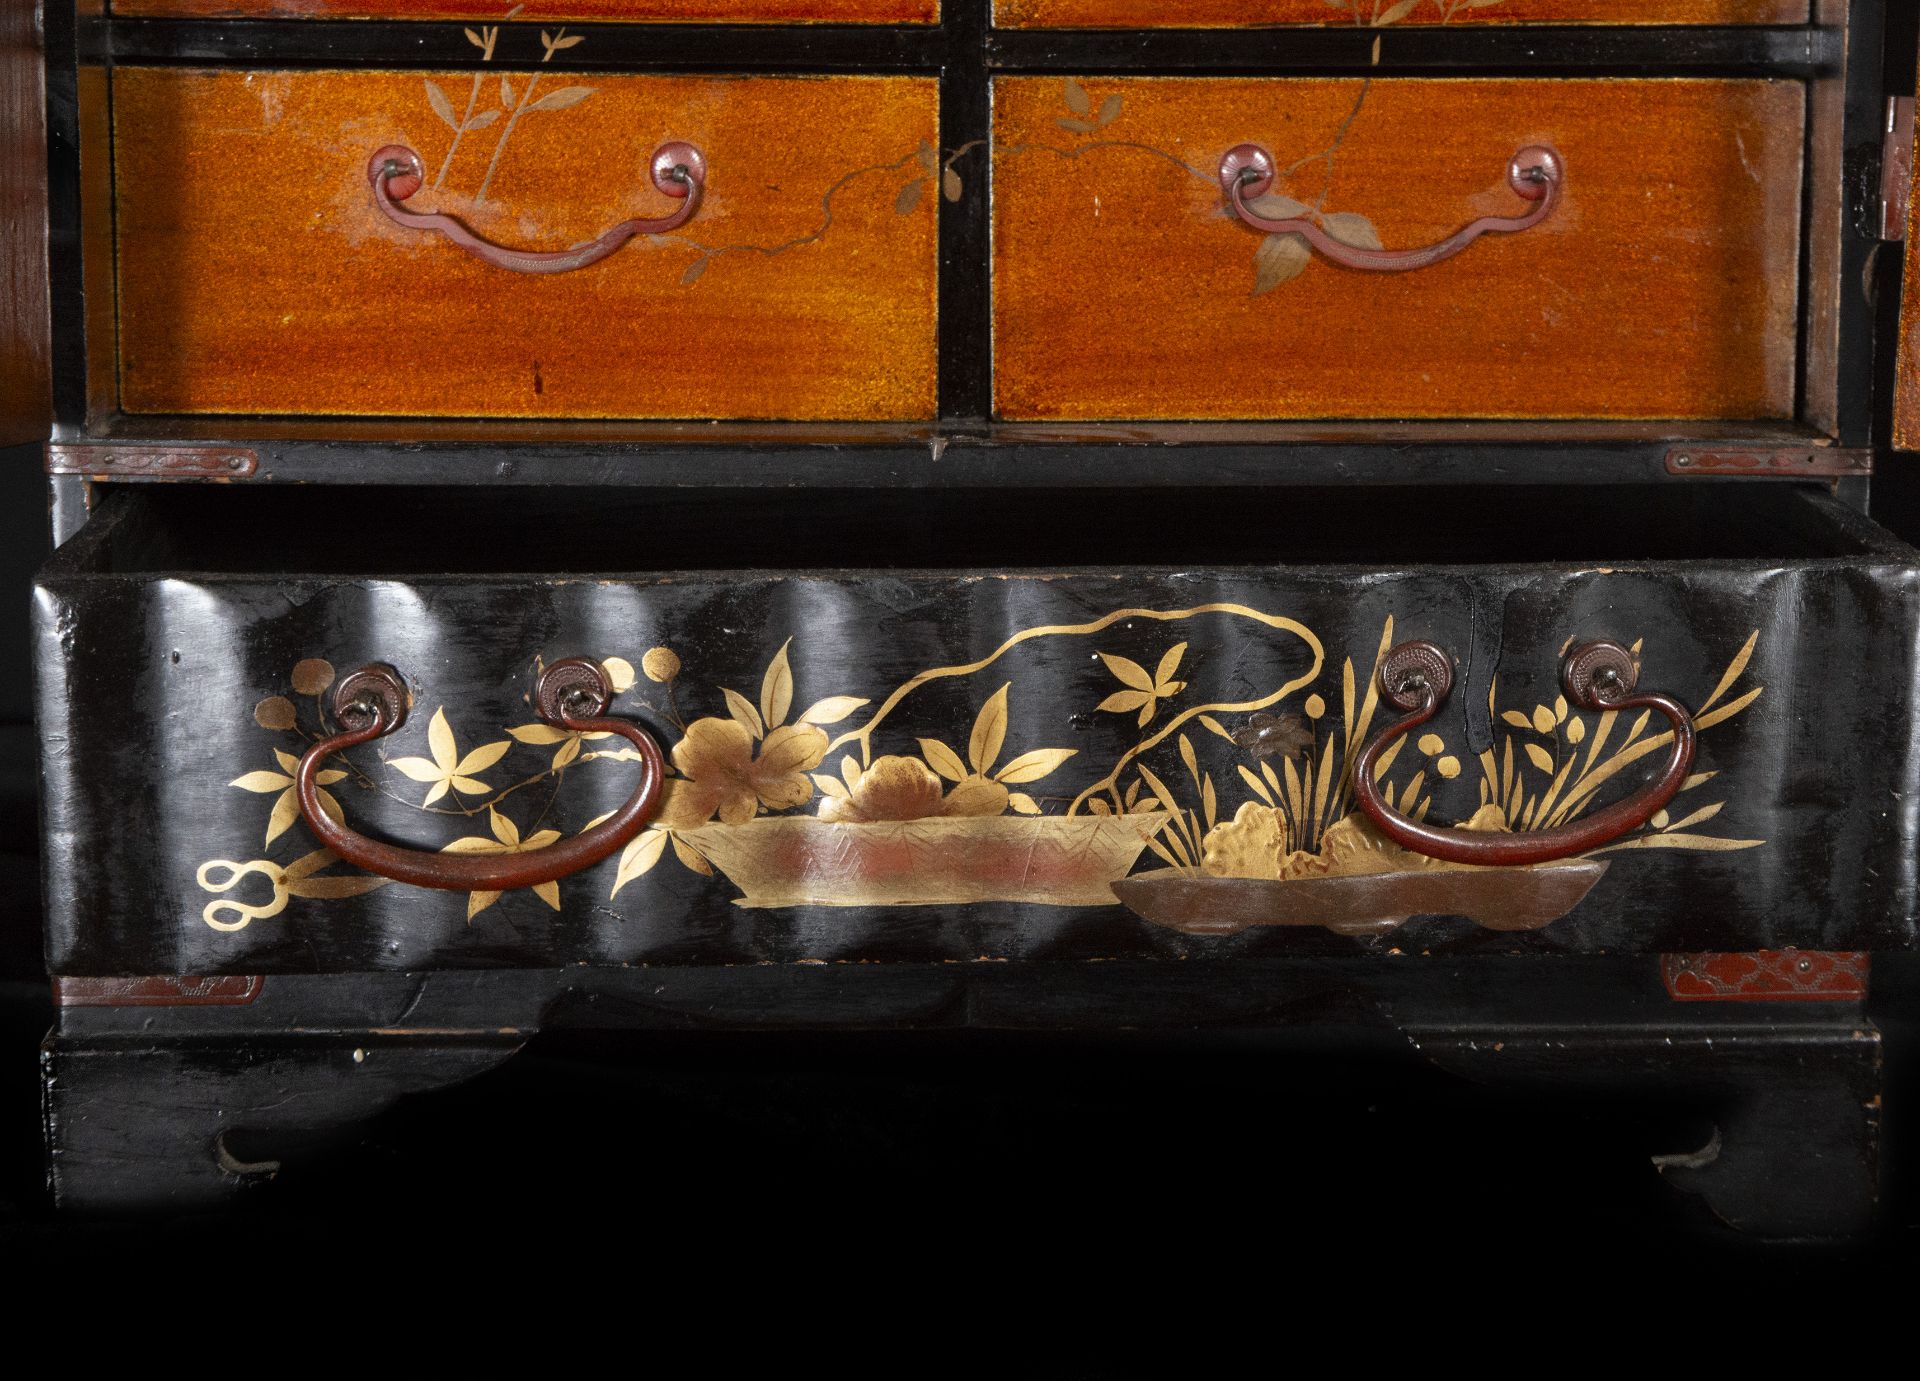 Exquisite Japanese Meiji tabletop cabinet in lacquered and gilded wood, 19th century - Image 6 of 8